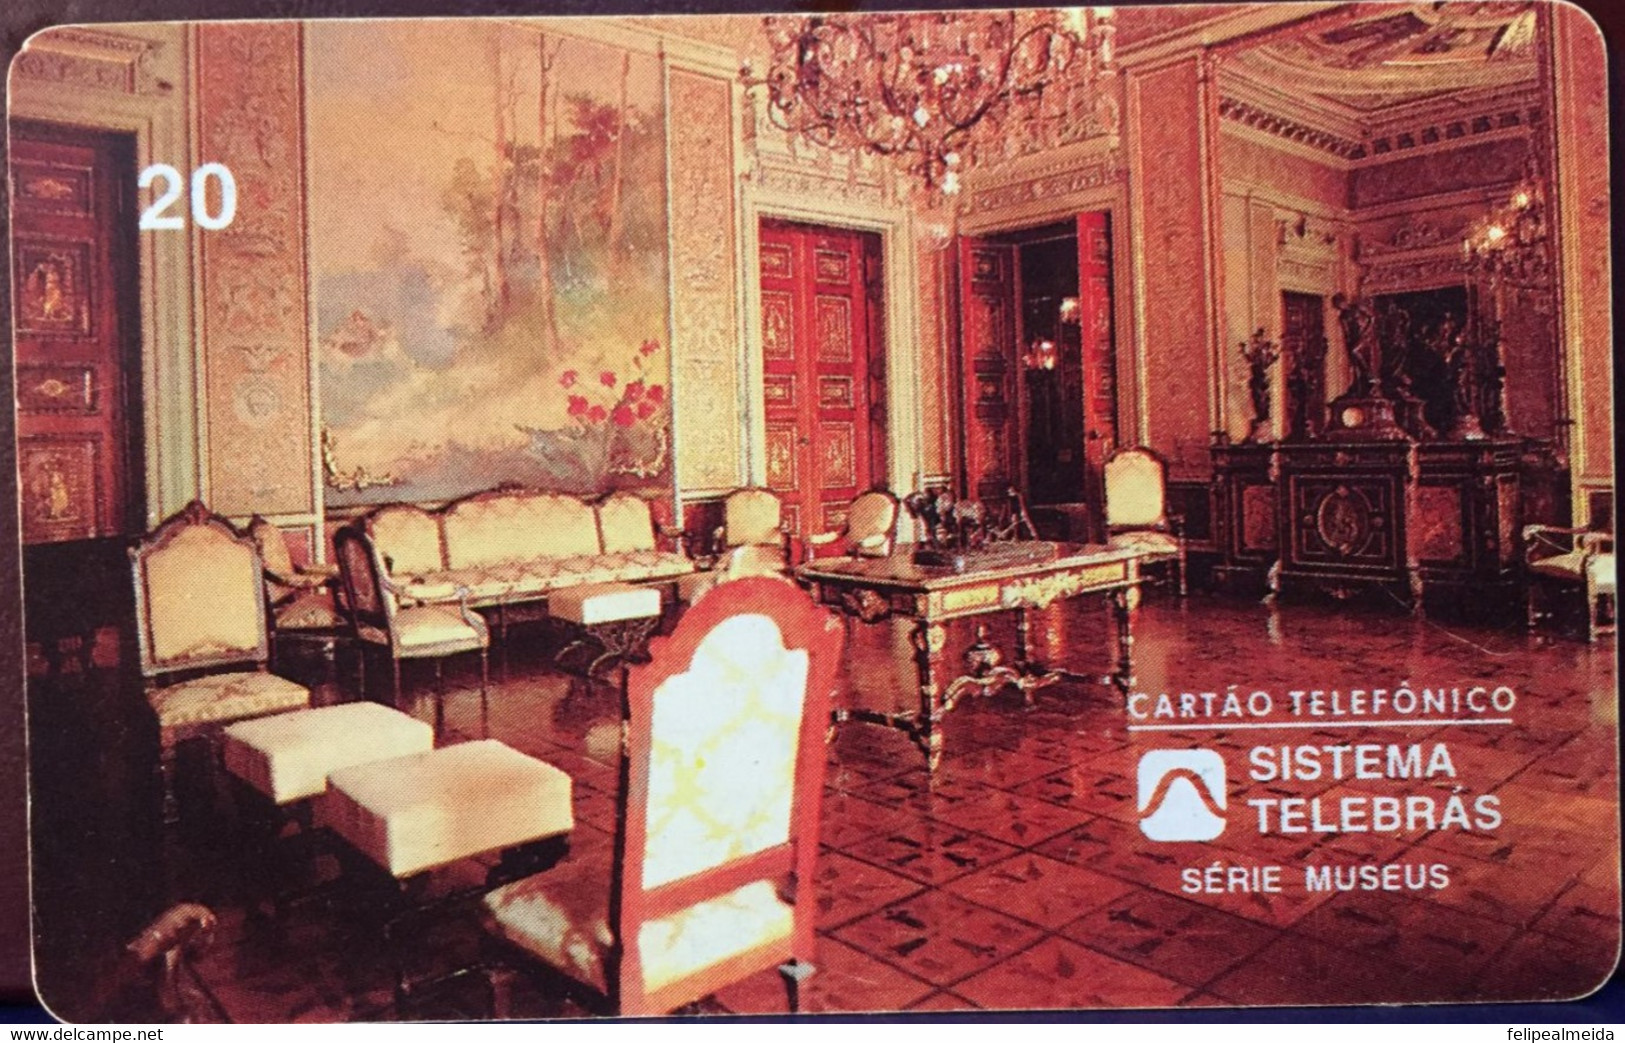 Phone Card Manufactured By Telebras In 1996 - Series Museums - Museum Of The Republic Of Rio De Janeiro - Venetian H - Kultur